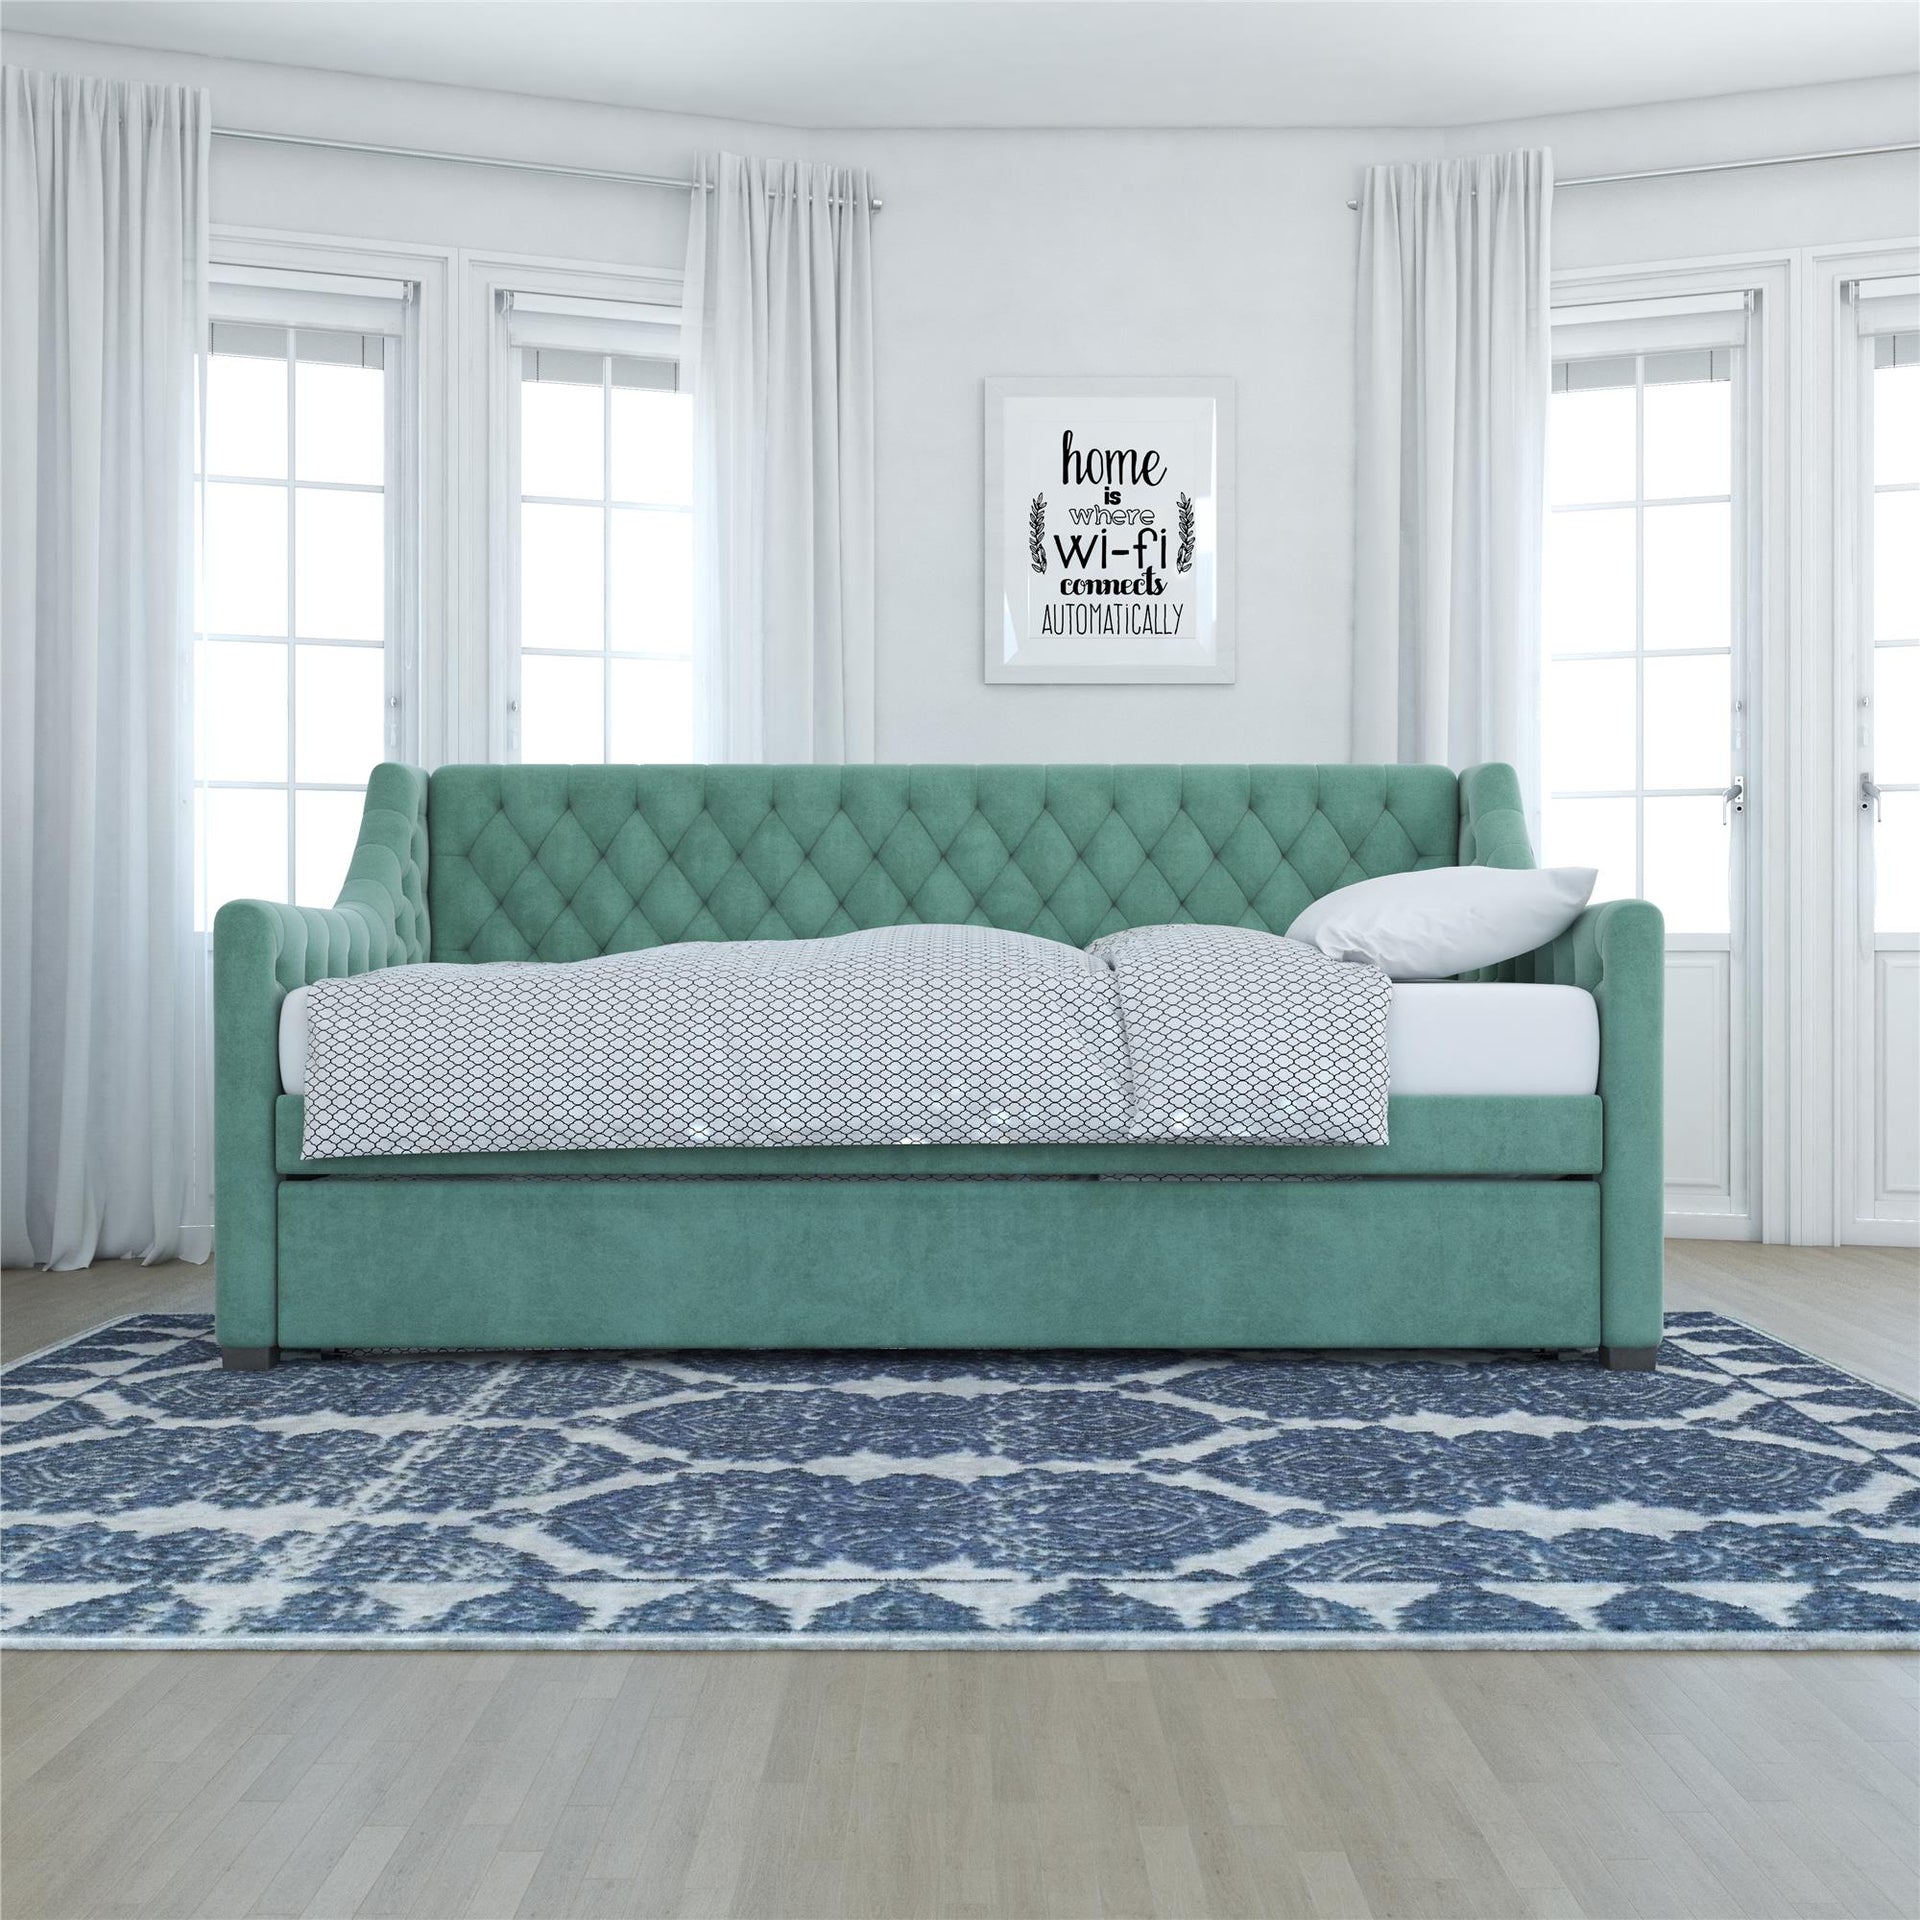 Little Seeds Monarch Hill Ambrosia Upholstered Daybed and Trundle - Teal - Twin